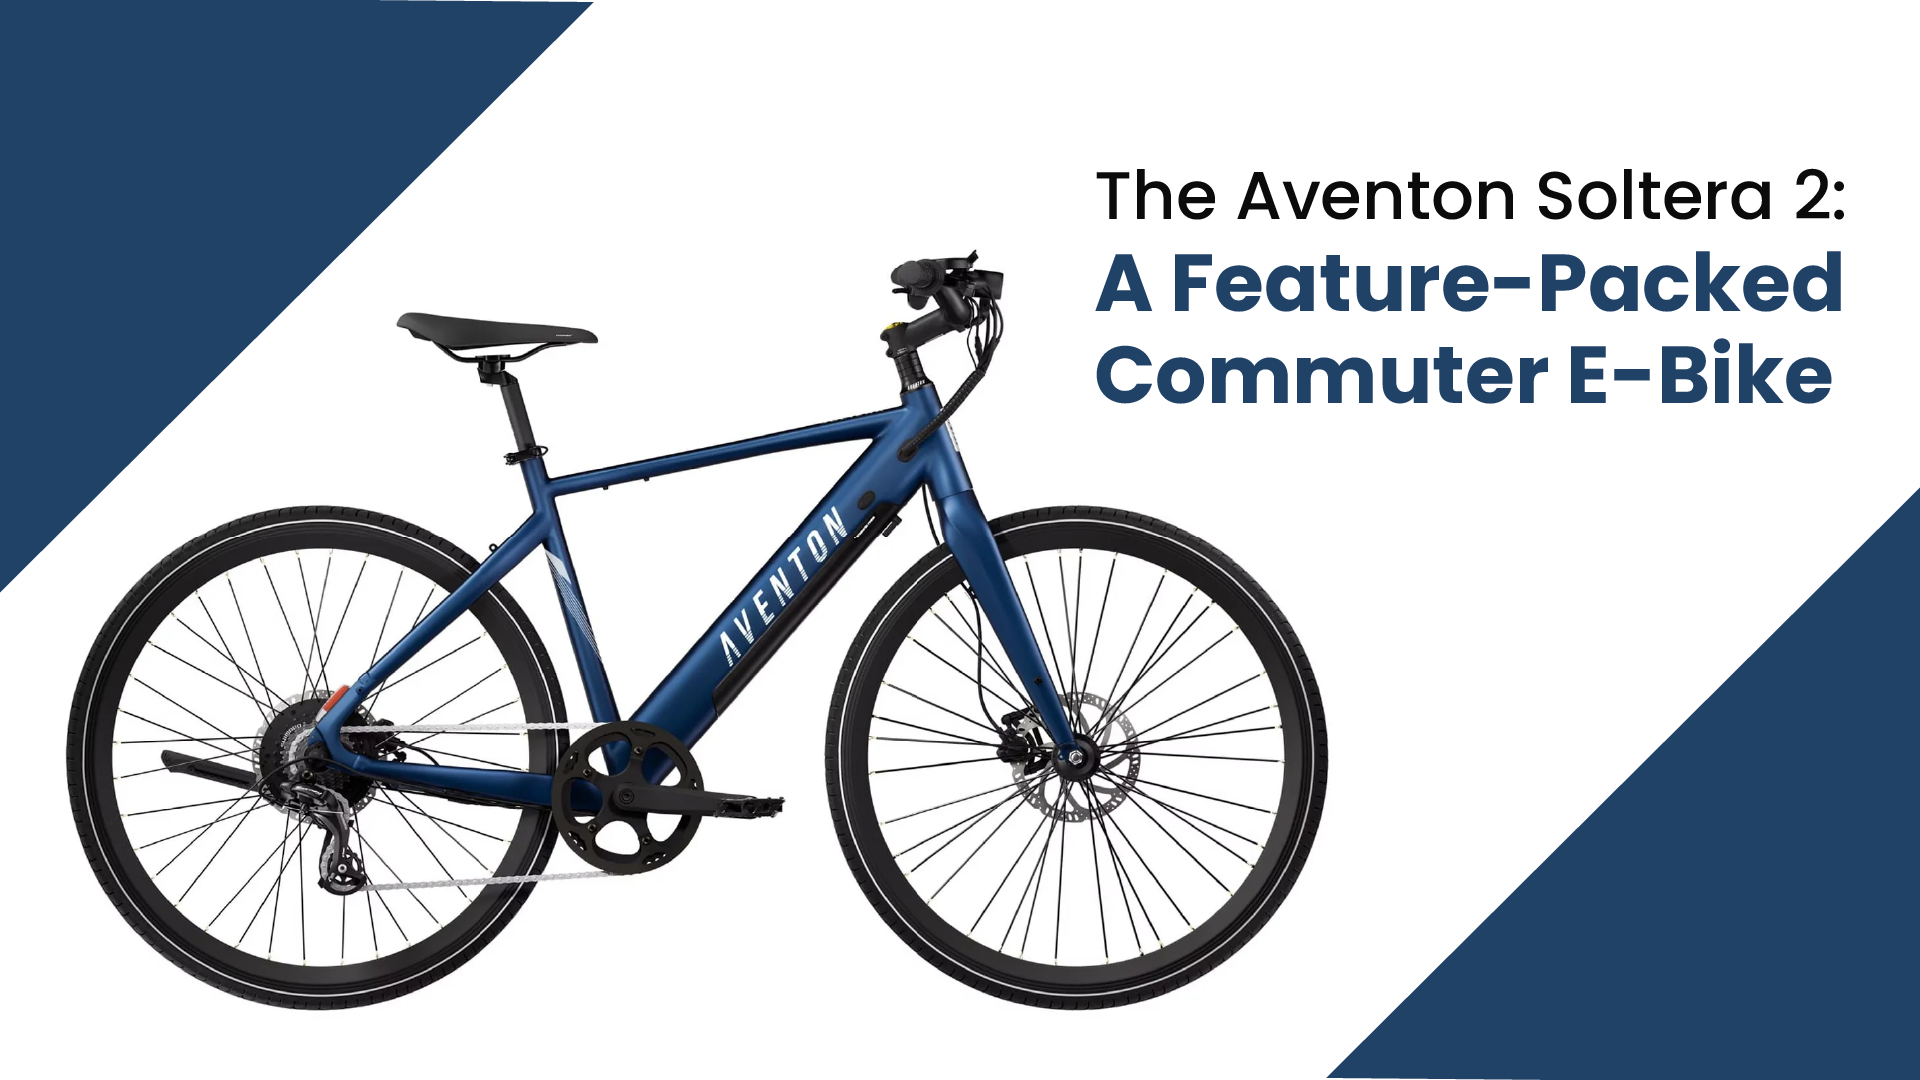 The Aventon Soltera 2: A Feature-Packed Commuter E-Bike